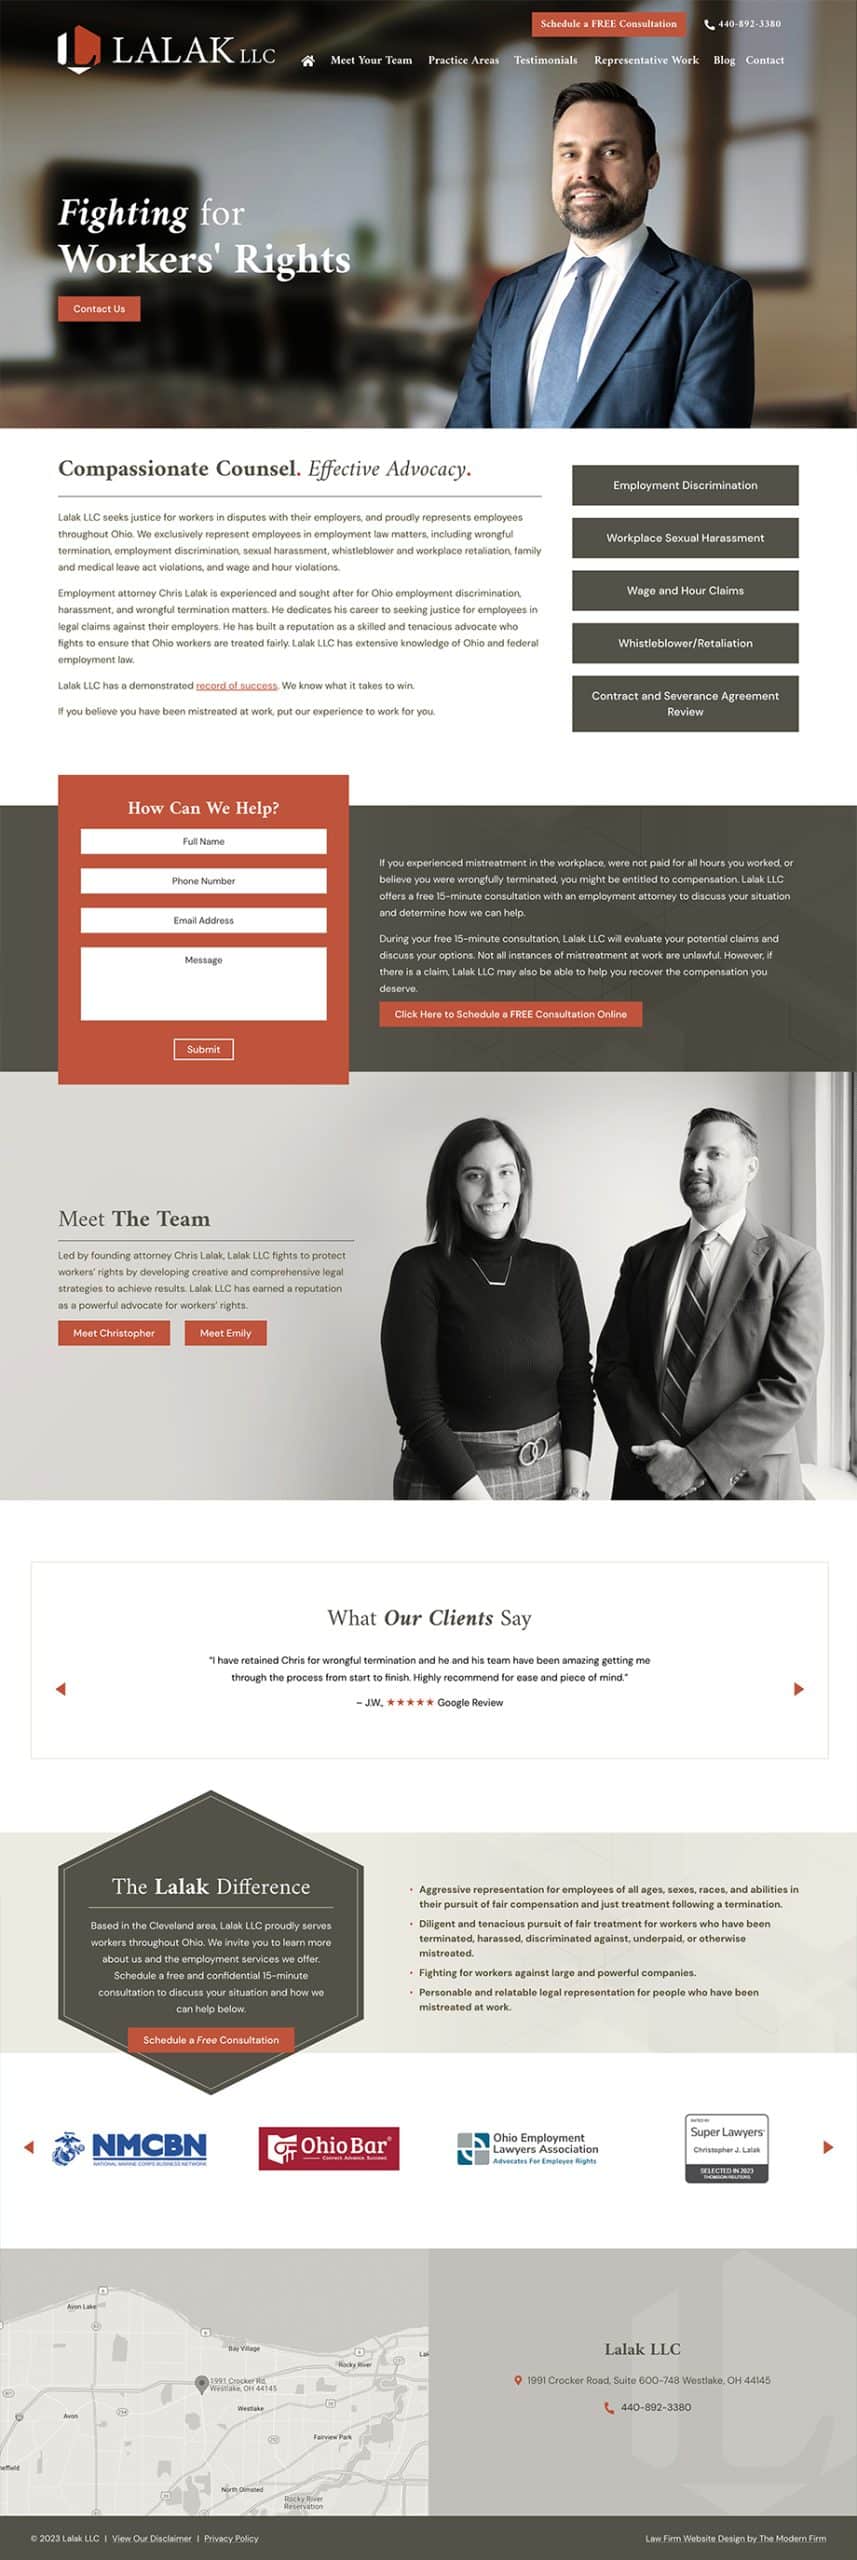 Law Firm Website for Lalak LLC